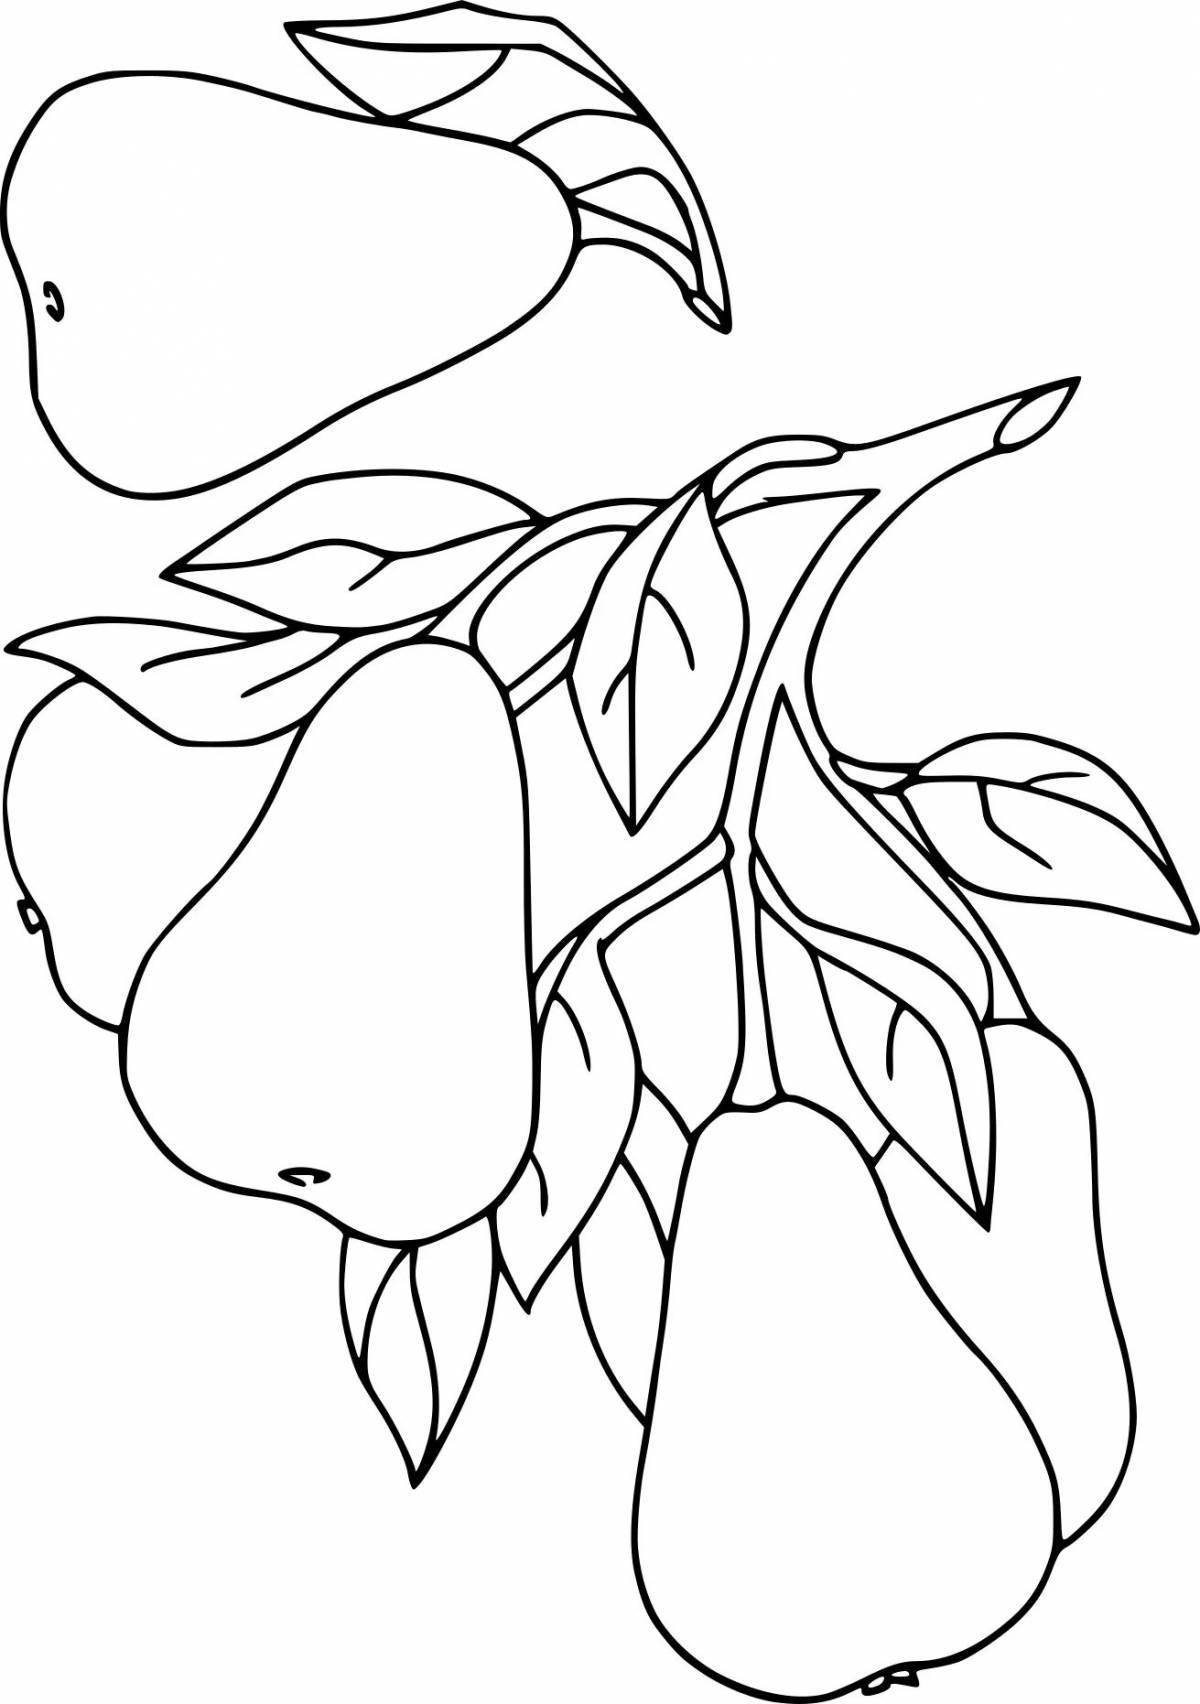 Amazing watercolor children's coloring pages